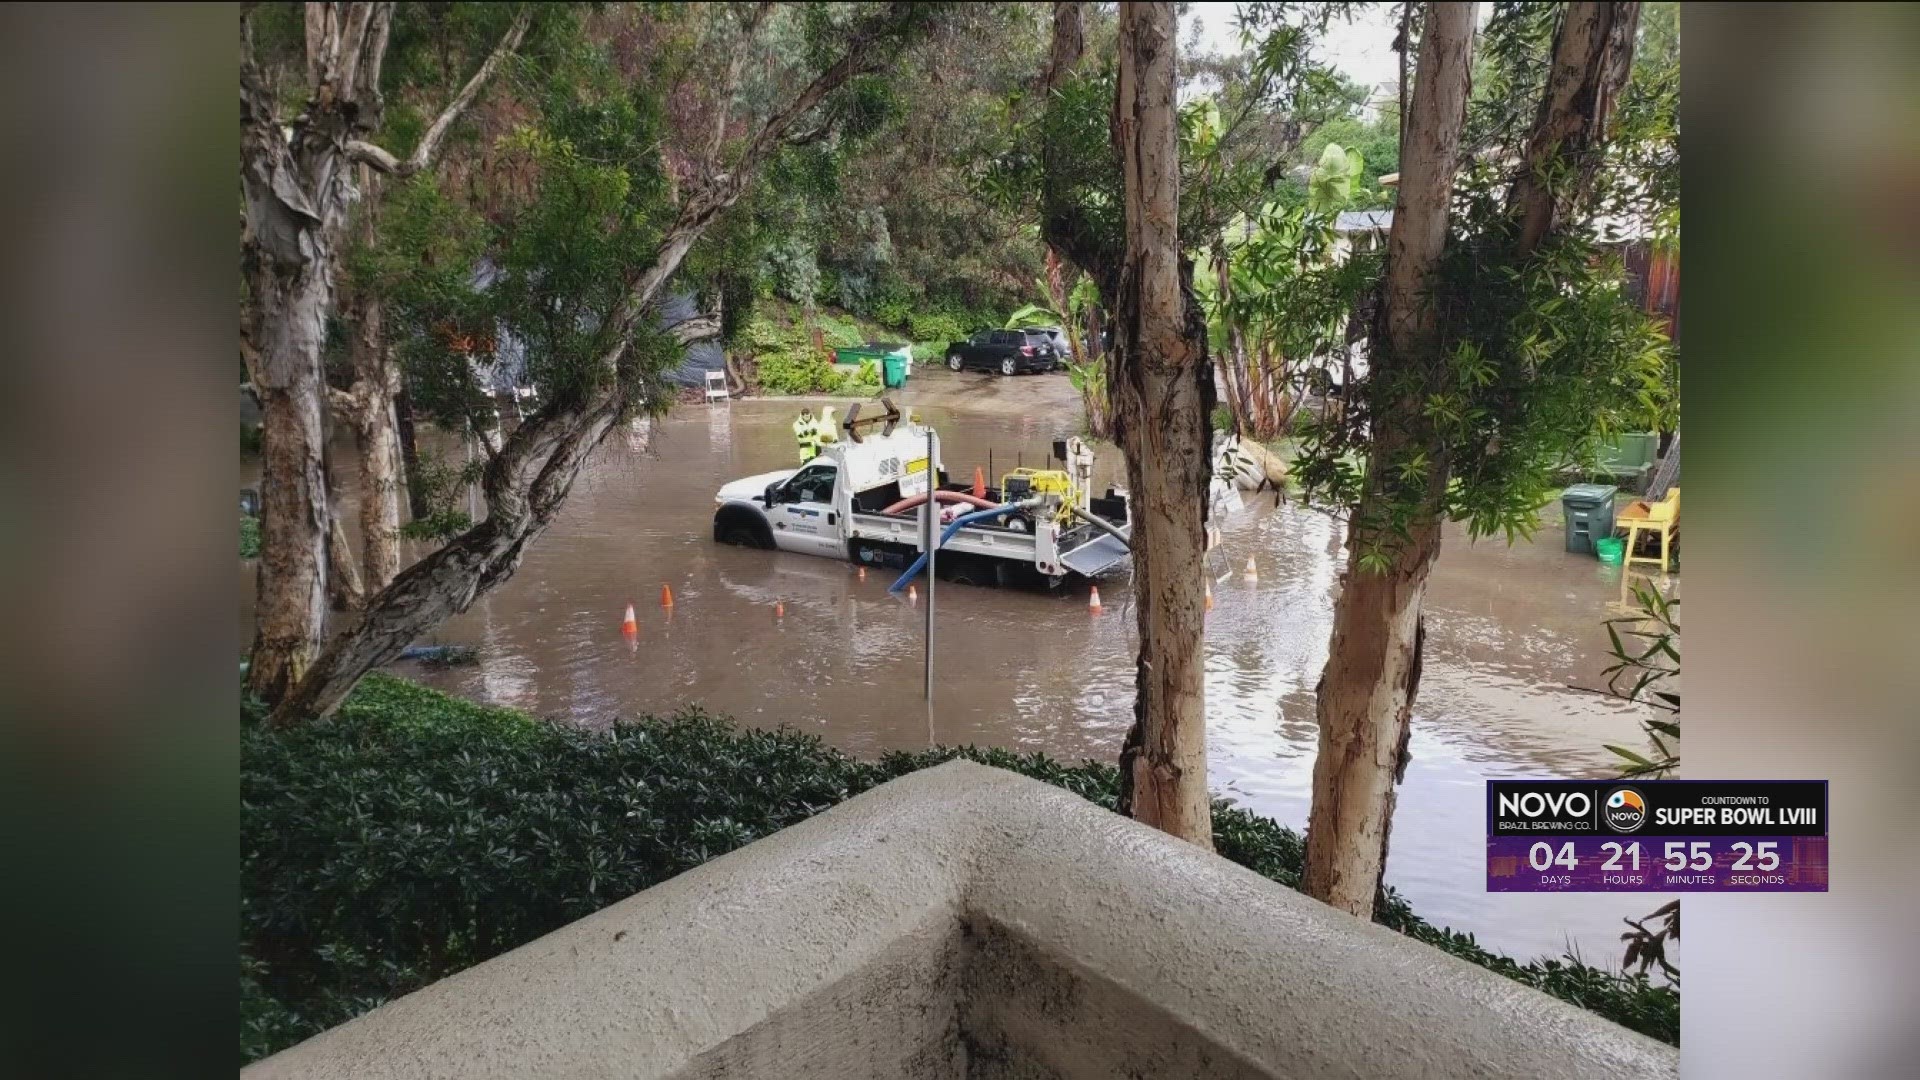 The City of San Diego said it has received more 500 storm-related calls over the past 24 hours.